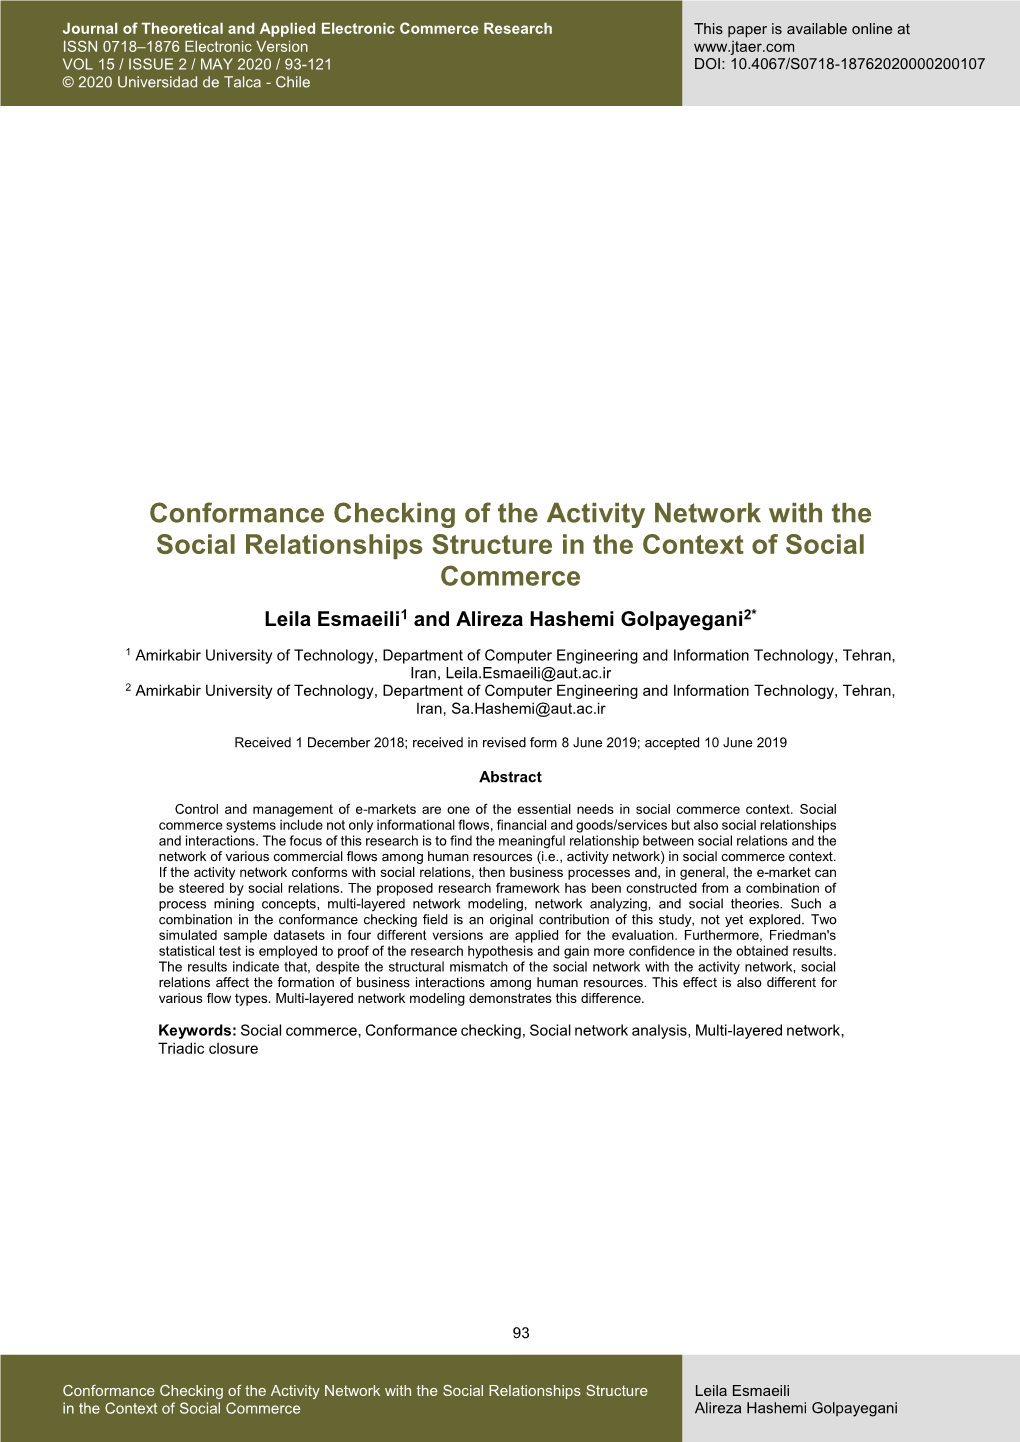 Conformance Checking of the Activity Network with the Social